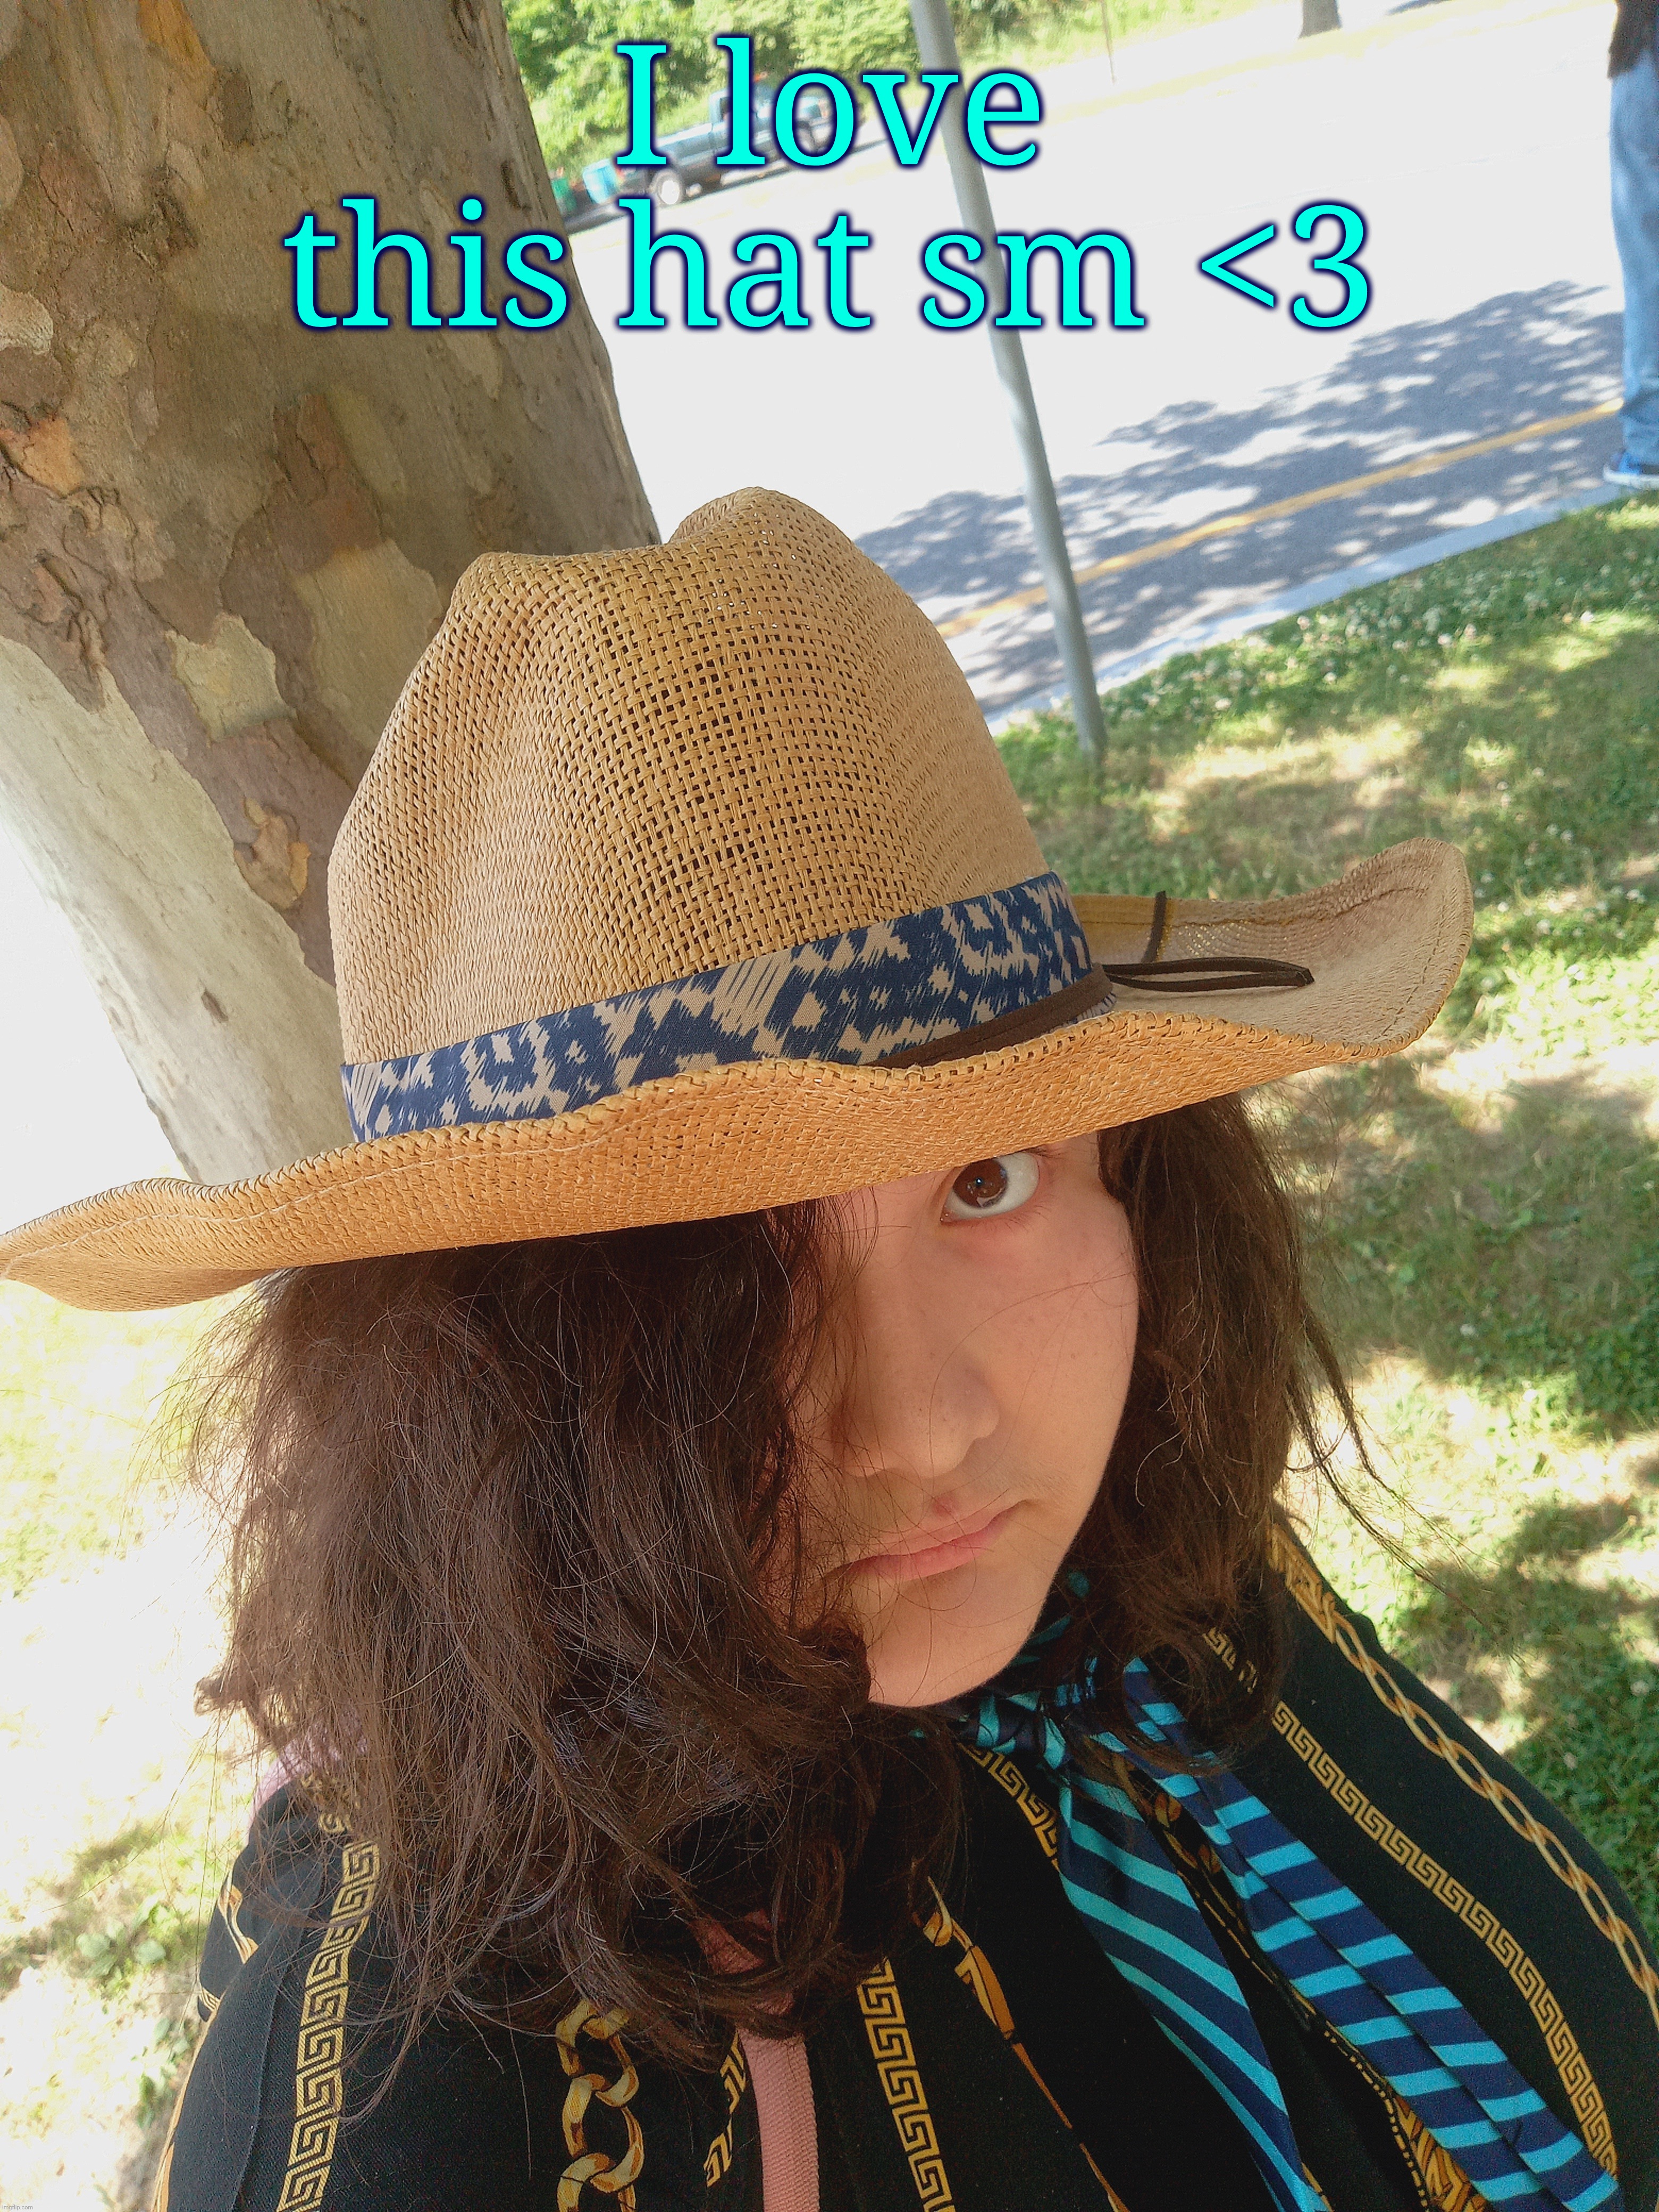 This hat>>>>>>>> | I love this hat sm <3 | made w/ Imgflip meme maker